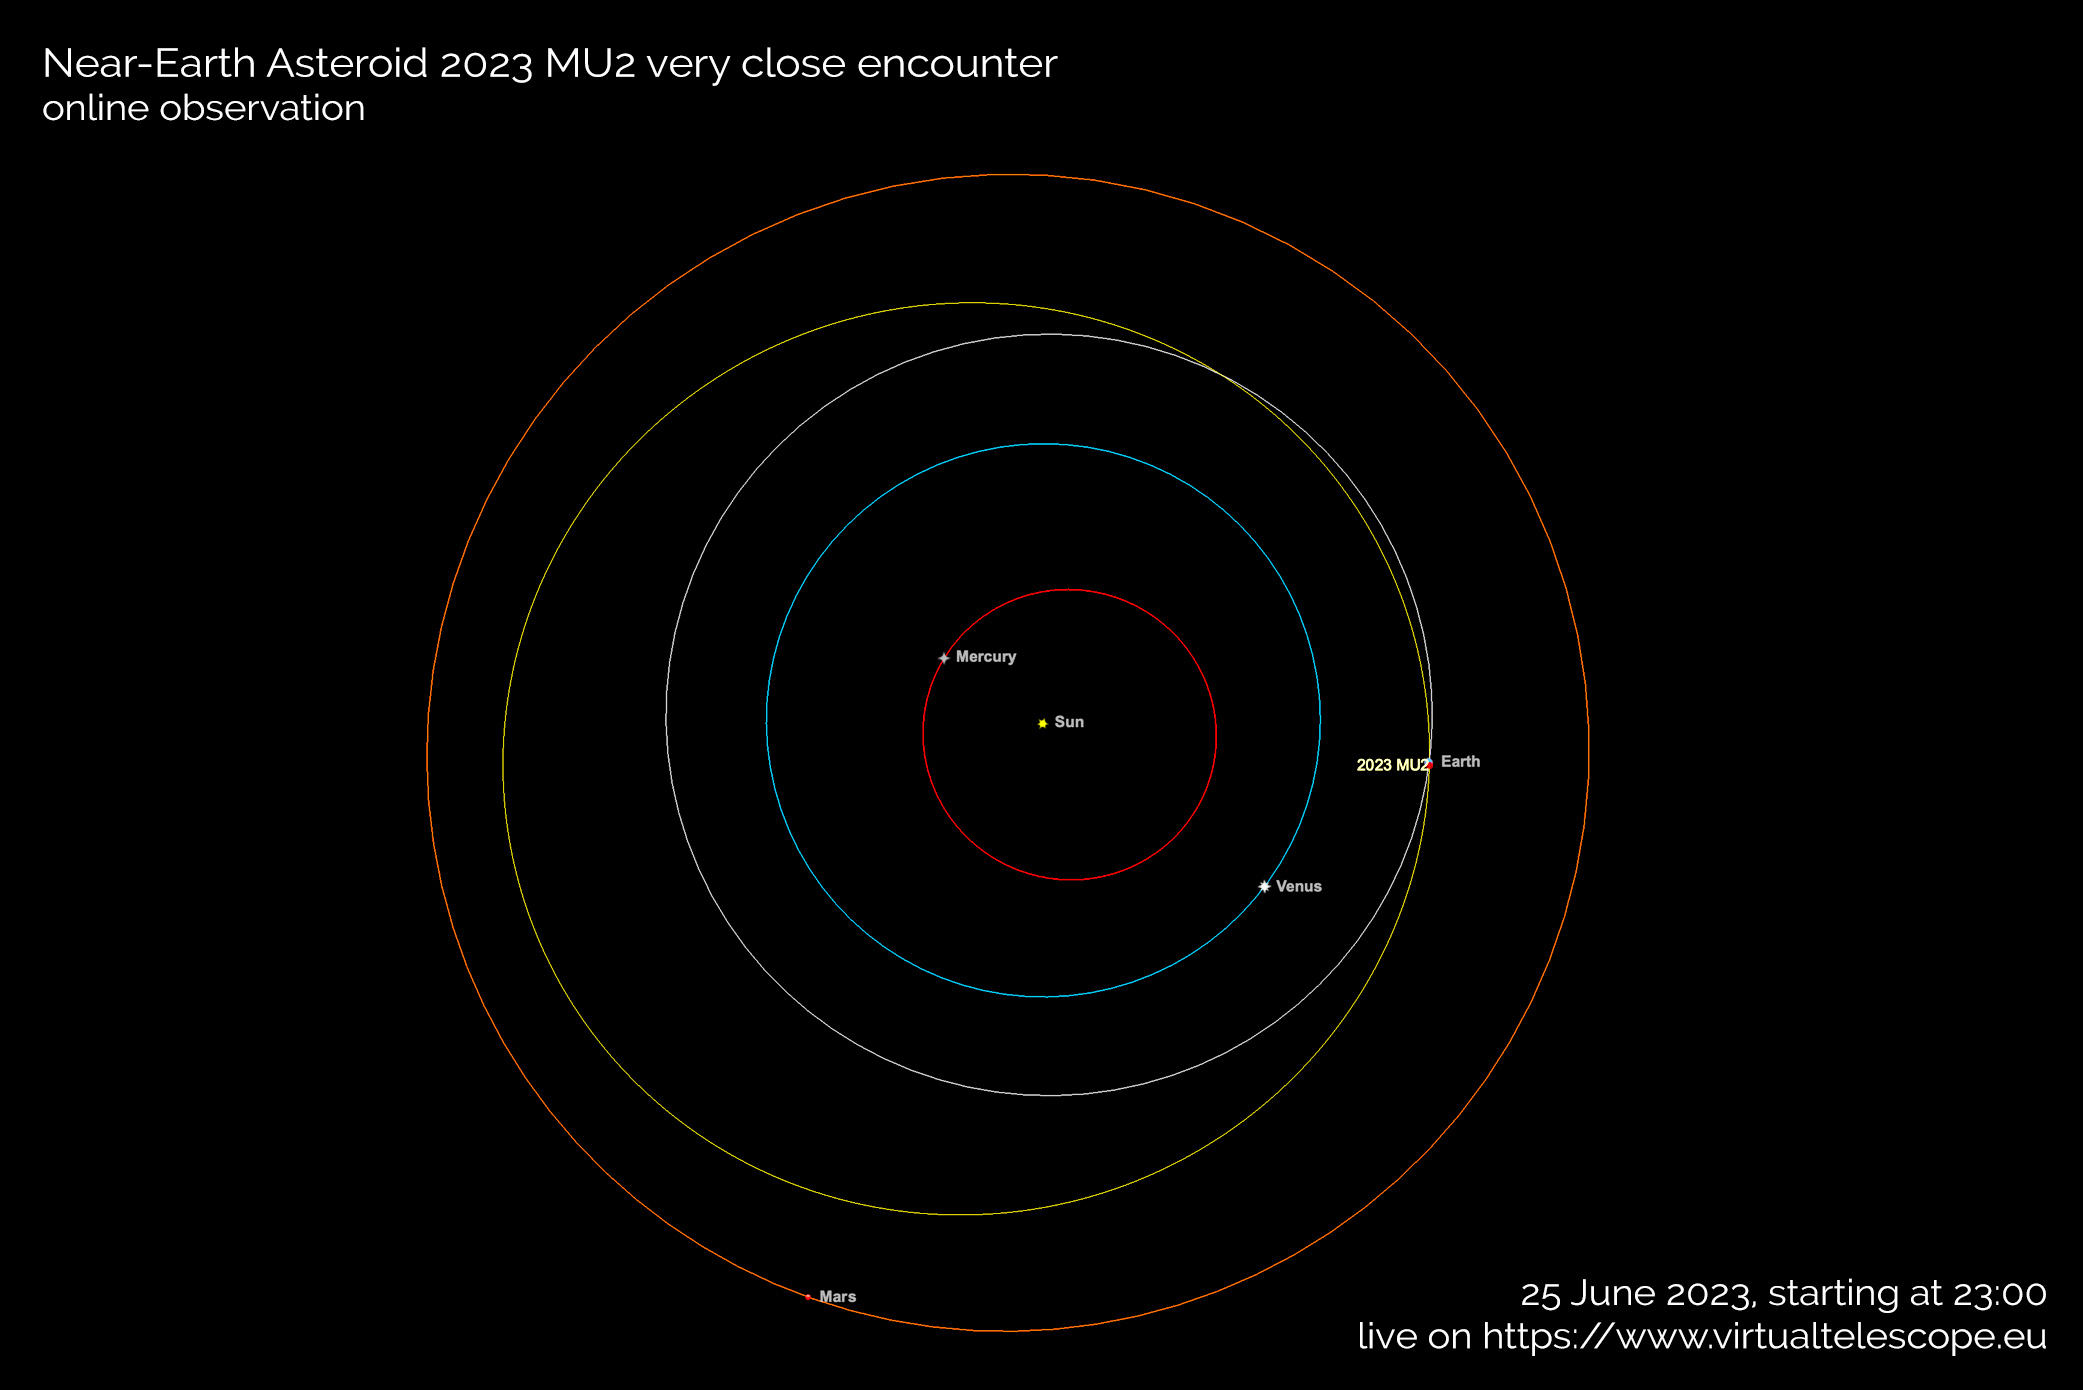 Near-Earth asteroid 2023 MU2: poster of the event.